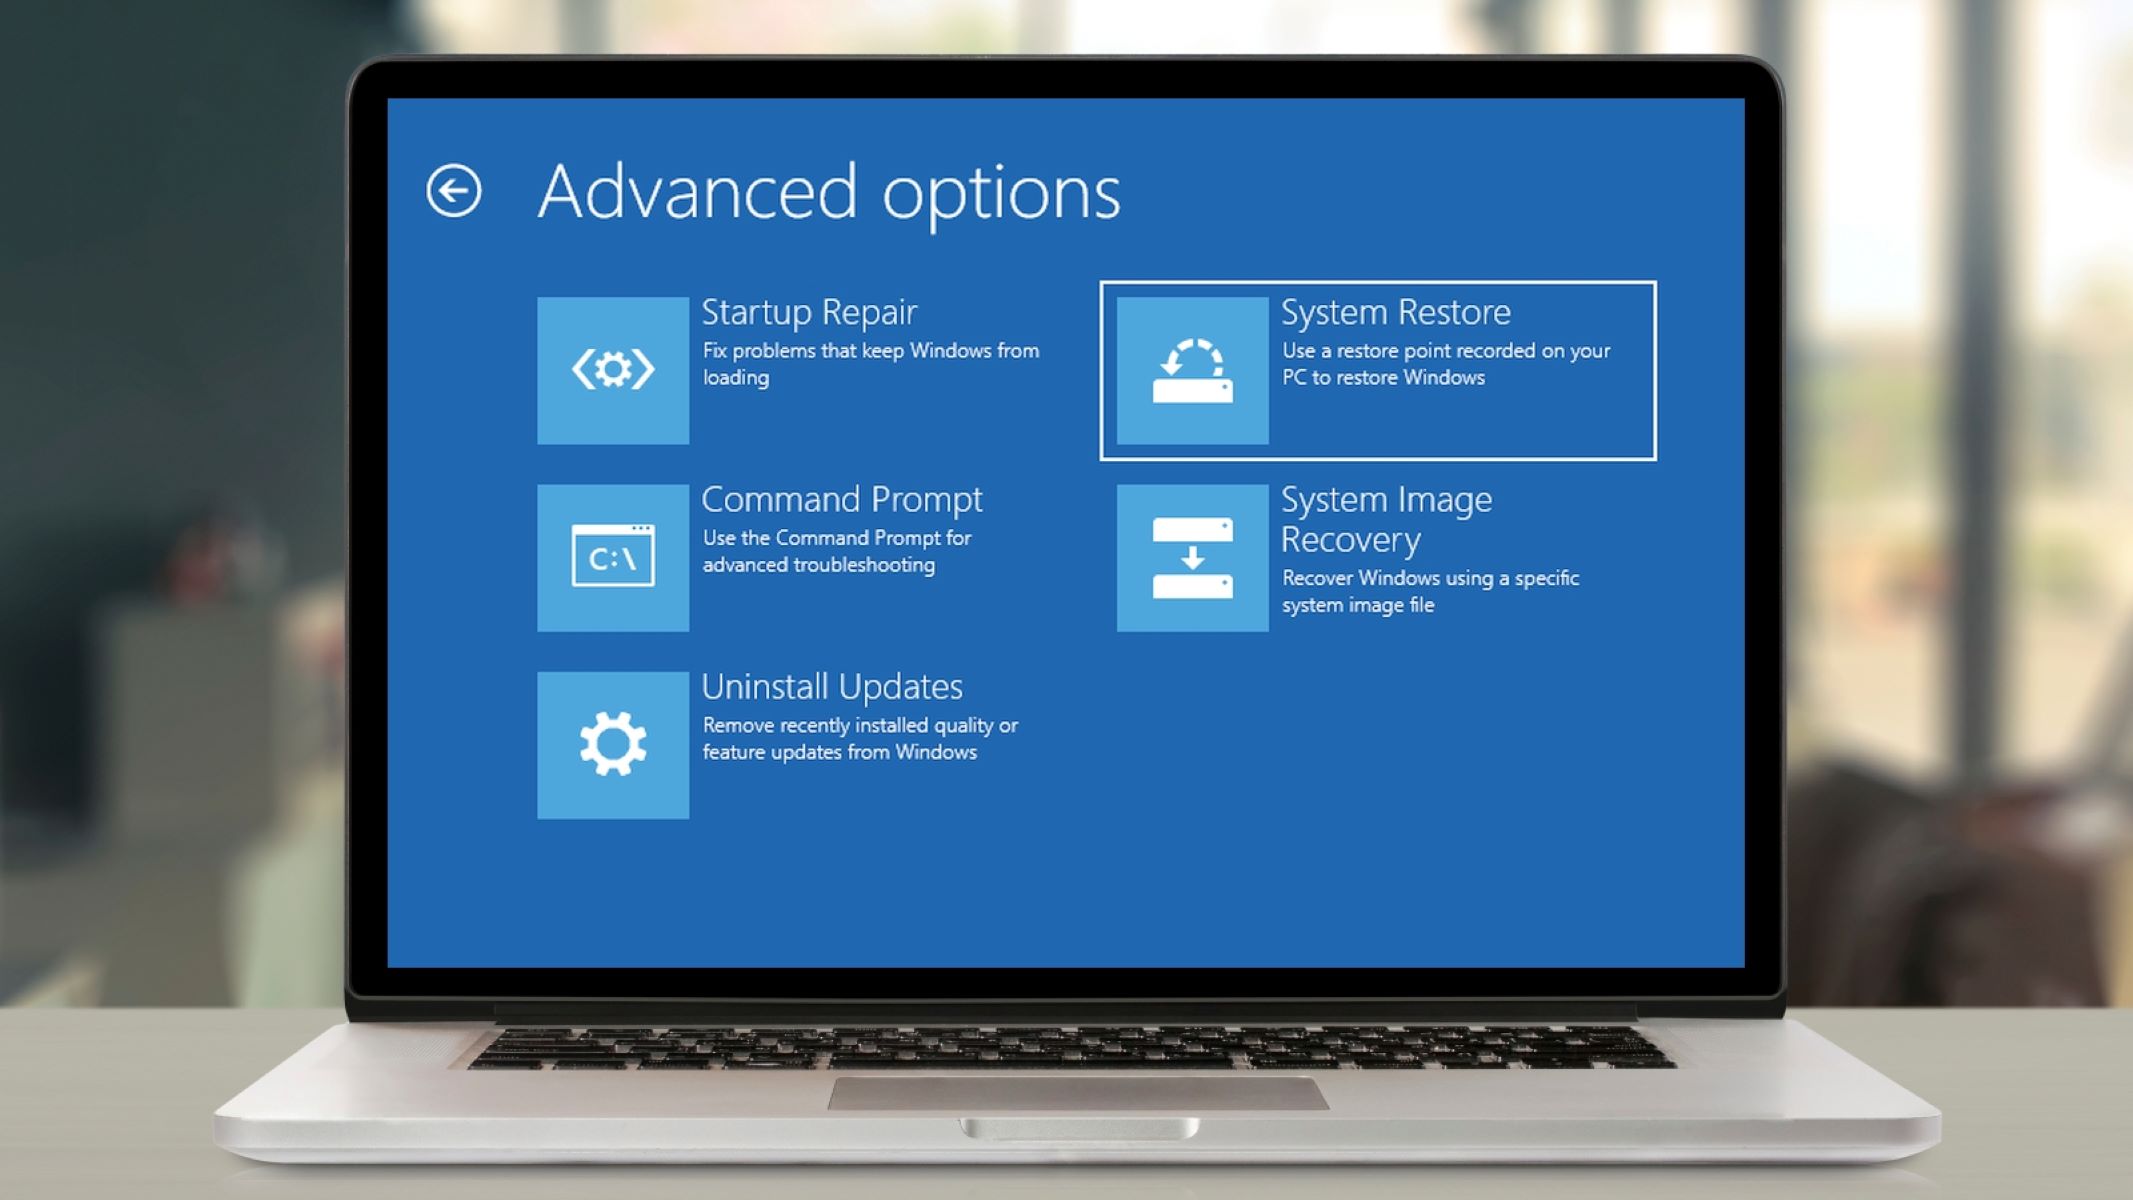 How To Do A System Restore On Windows 10